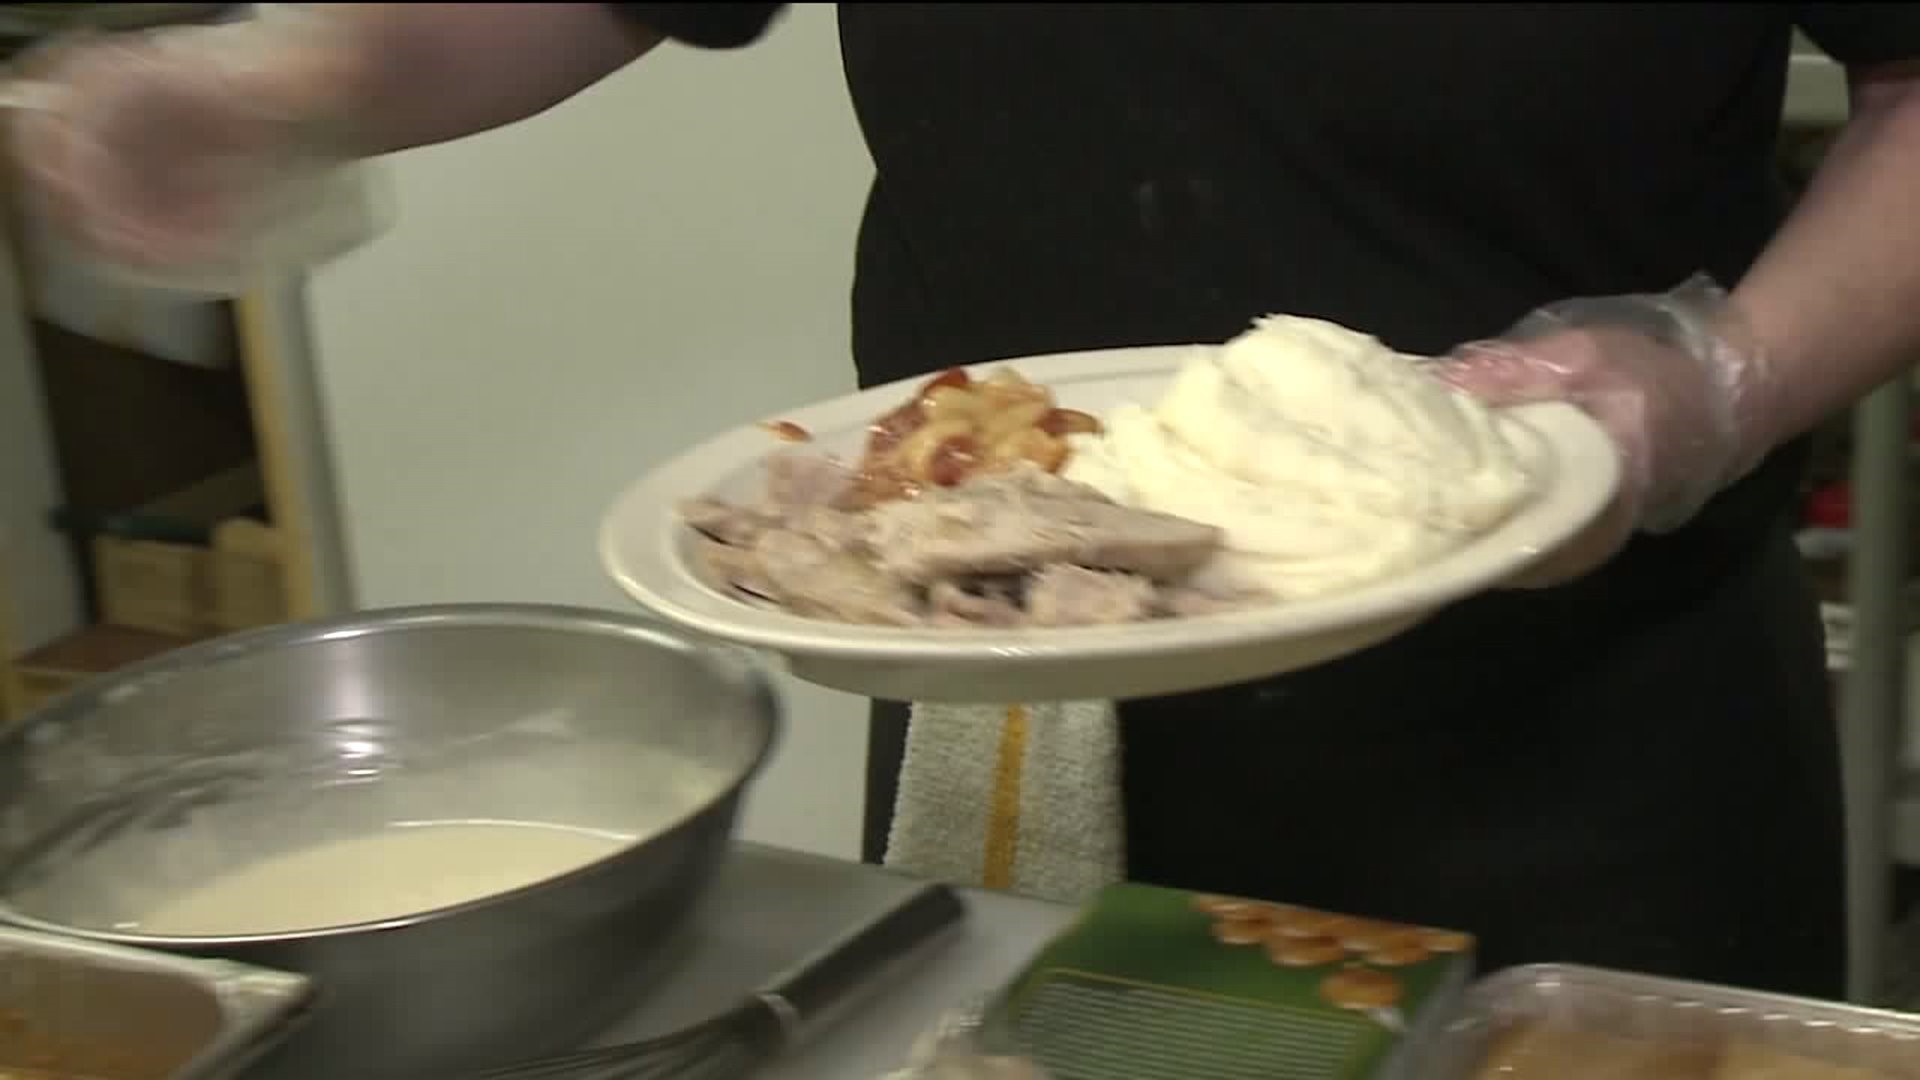 Restaurant Hosts Families in Need for Christmas Eve Dinner